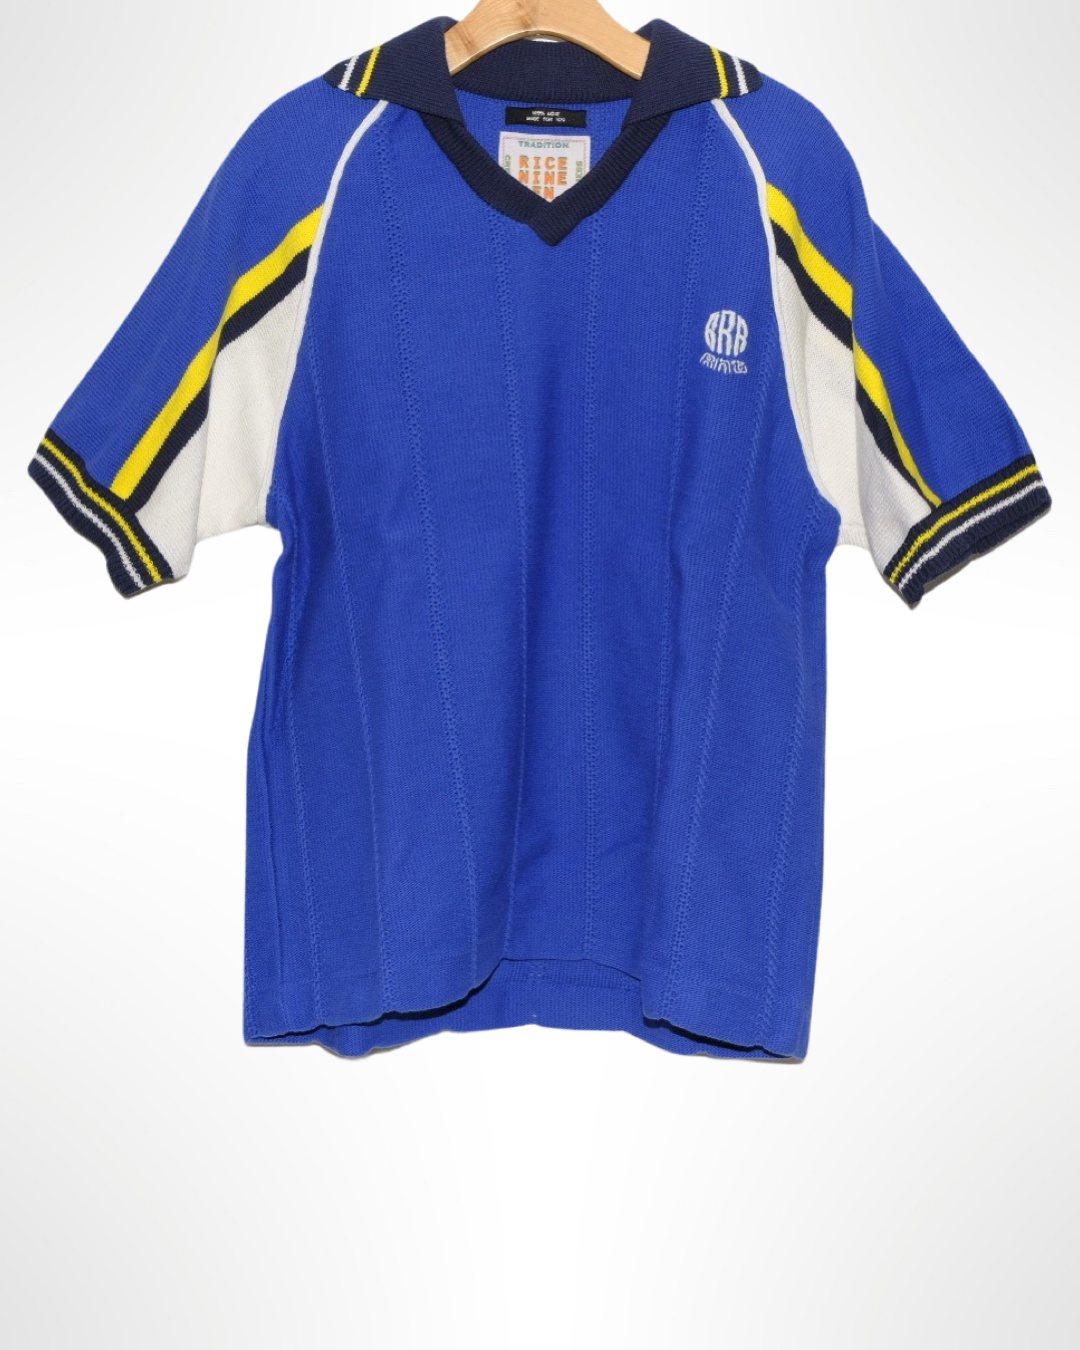 knitted soccer jersey in blue